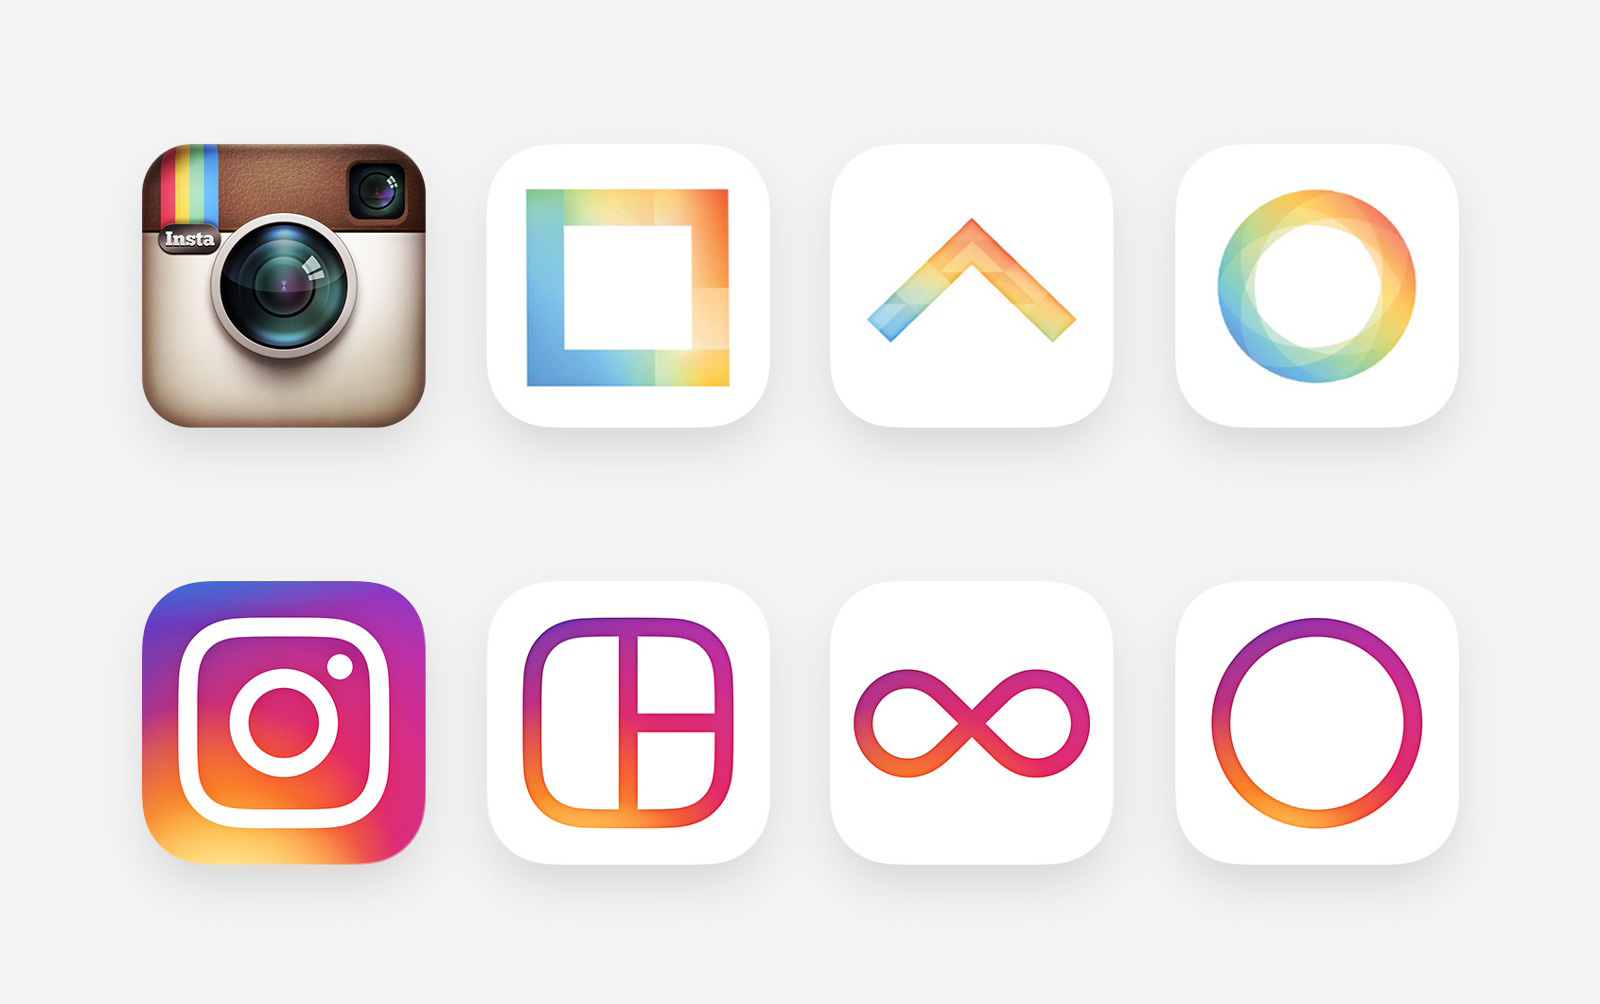 Designing a New Look for Instagram, Inspired by the Community